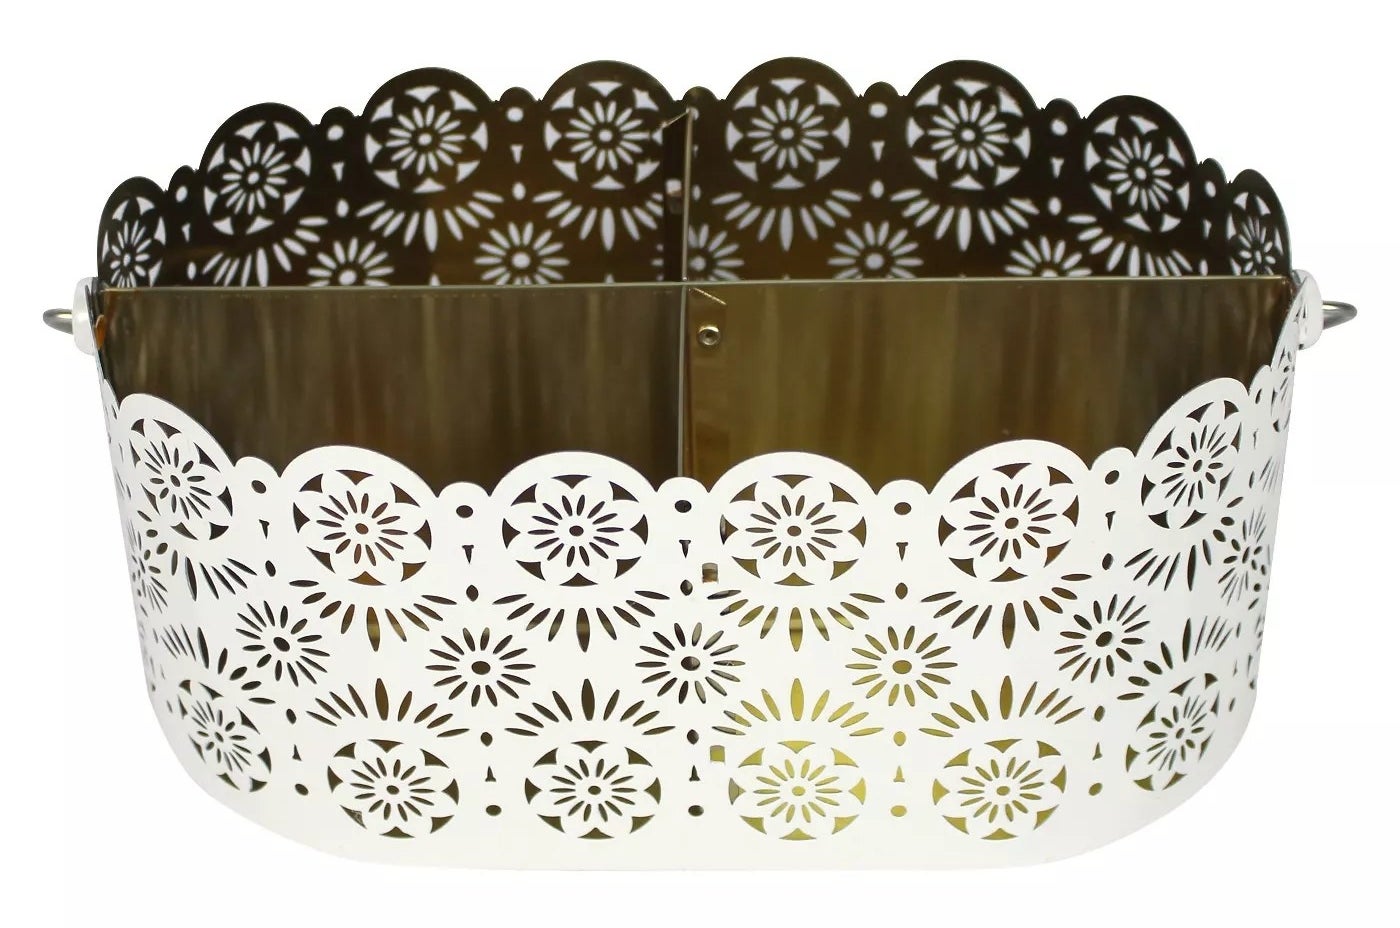 The white floral utensil caddy